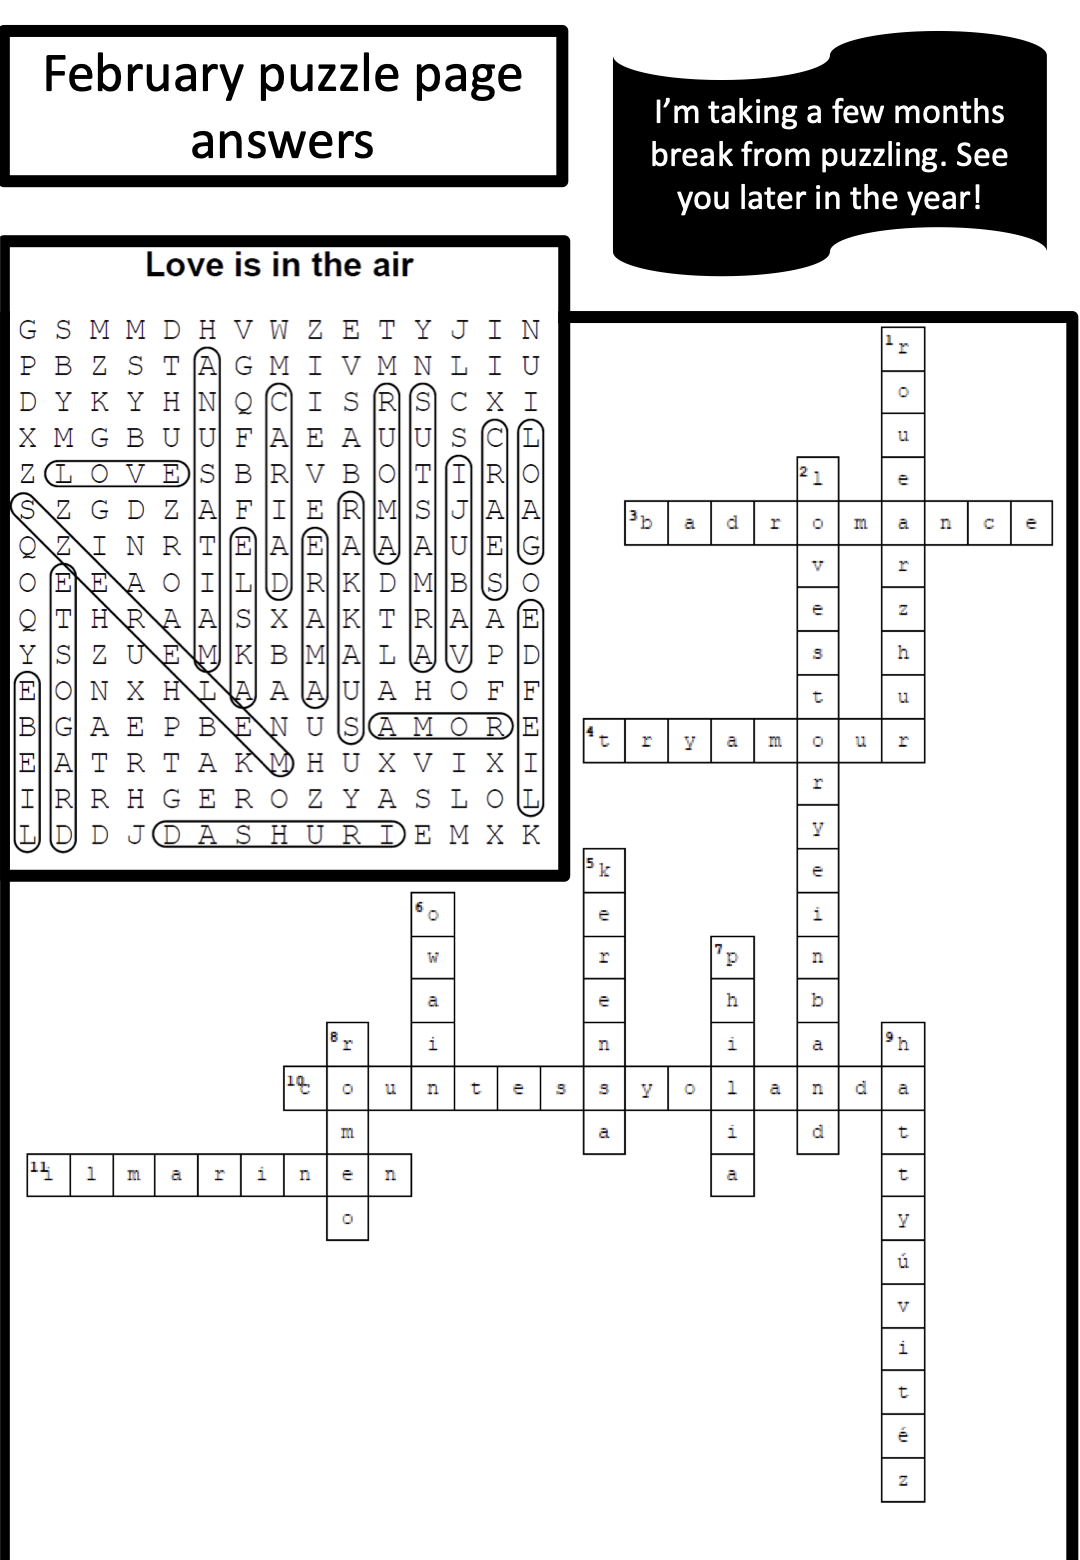 Completed word search and crossword